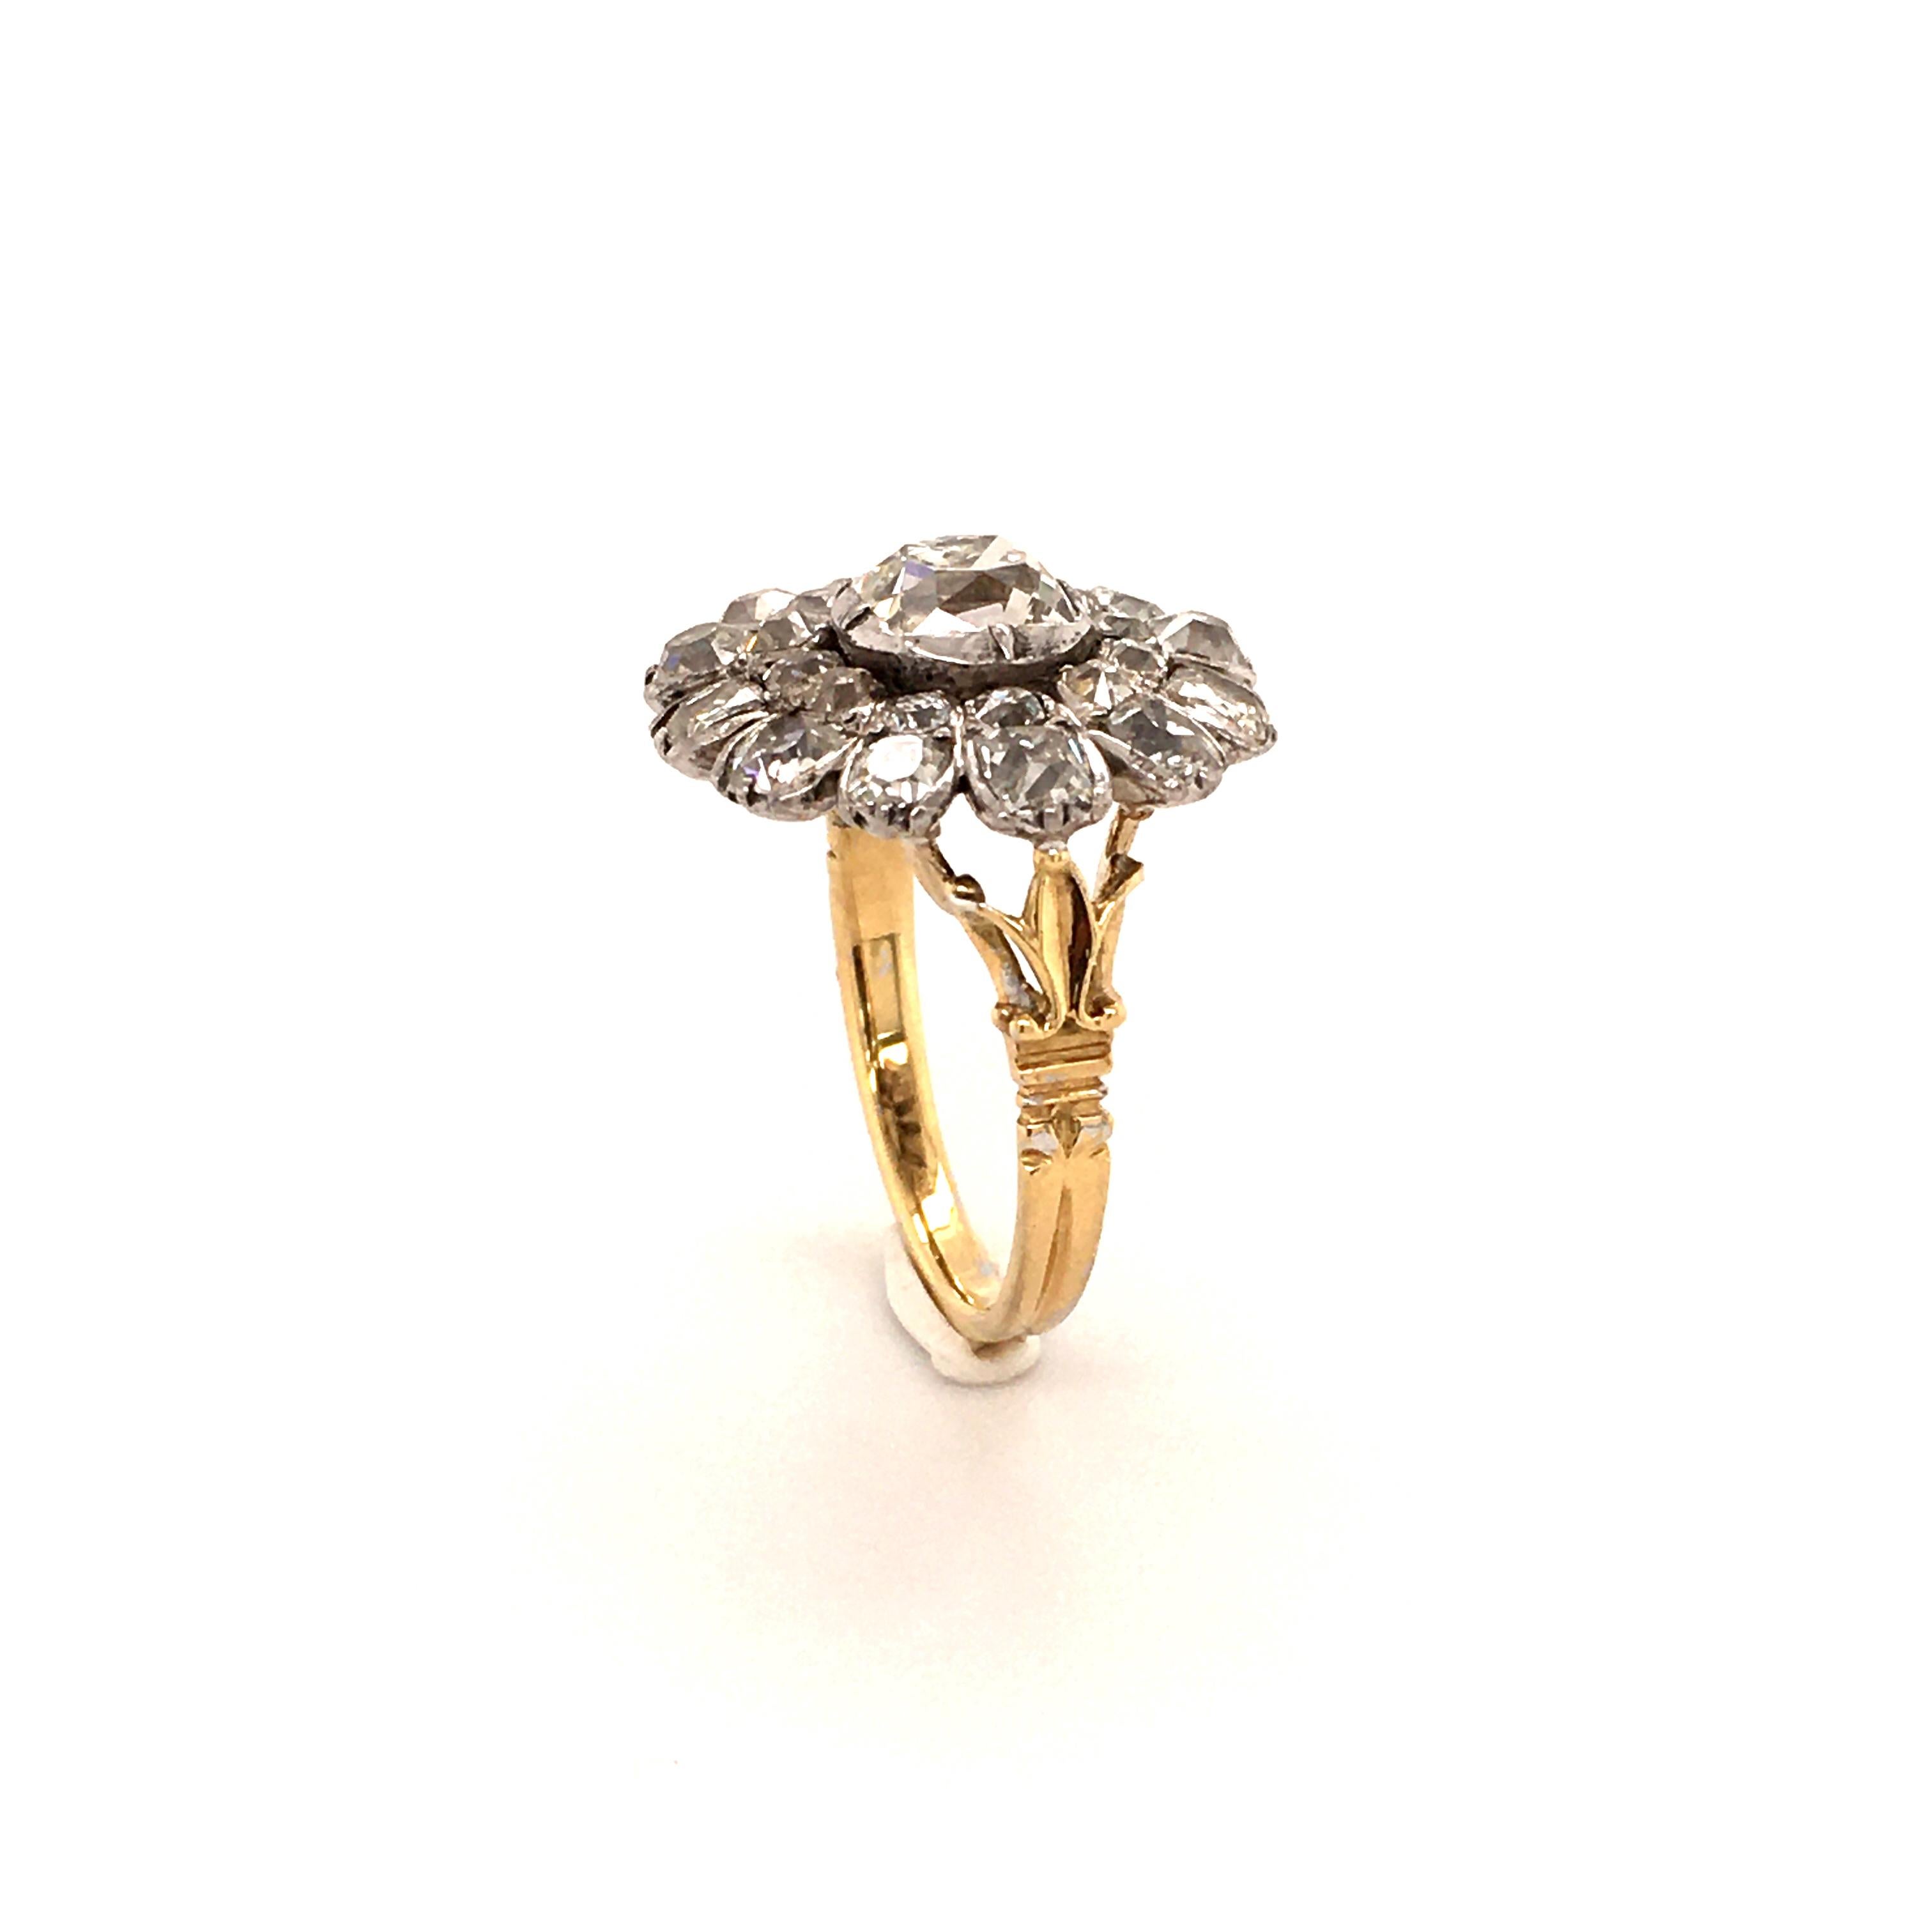 Old Mine Cut Old Cut Diamond Ring Crafted in Gold 750 and Silver